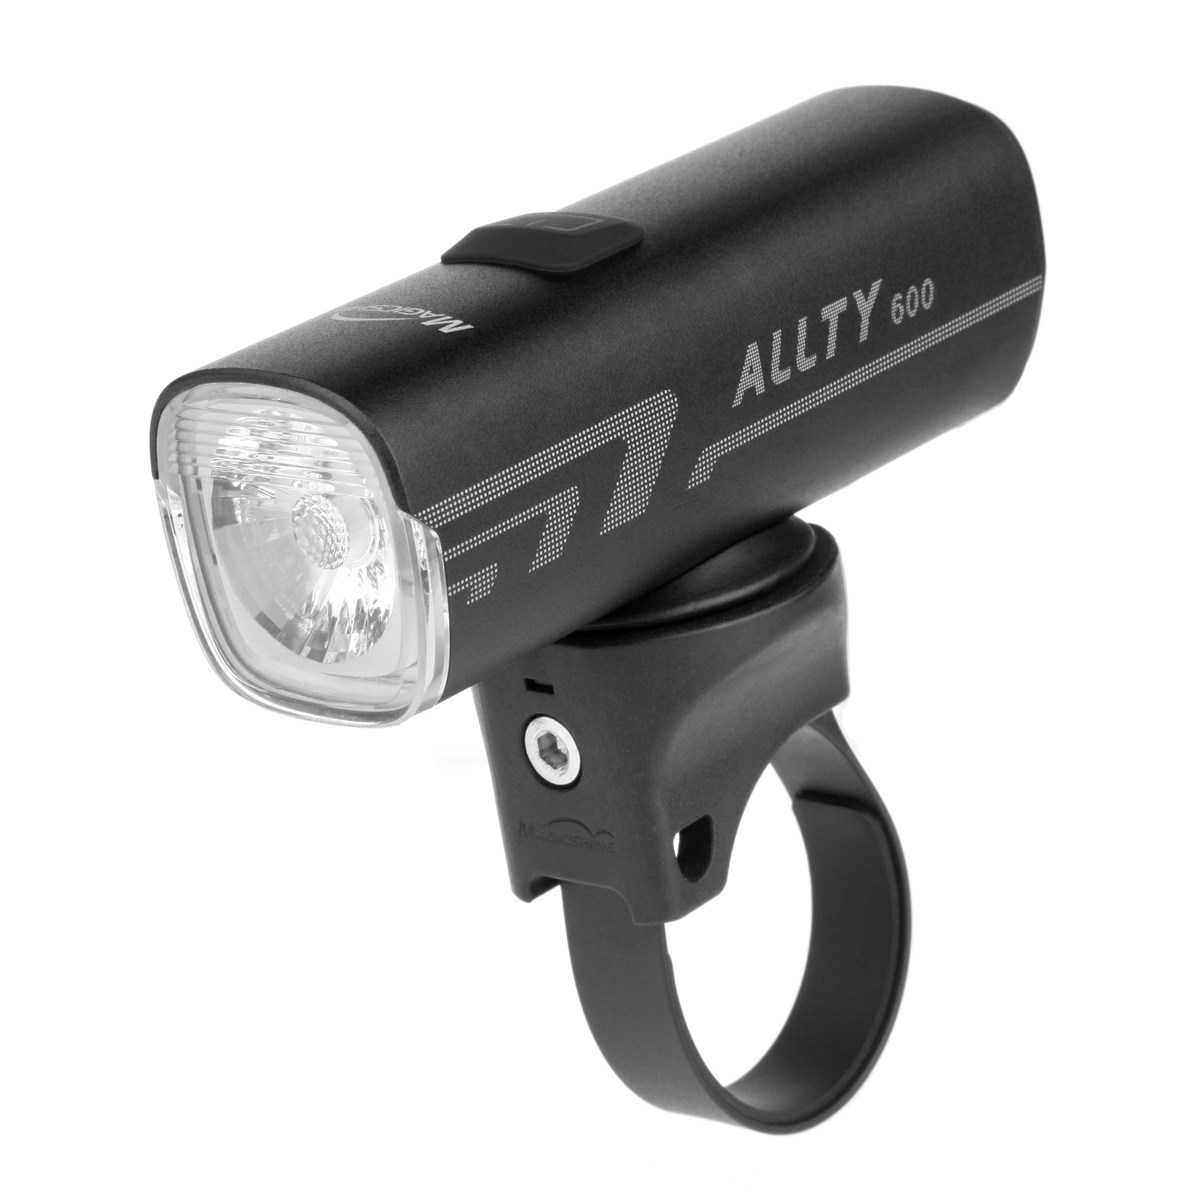 Magicshine Allty 600 Front Light product image